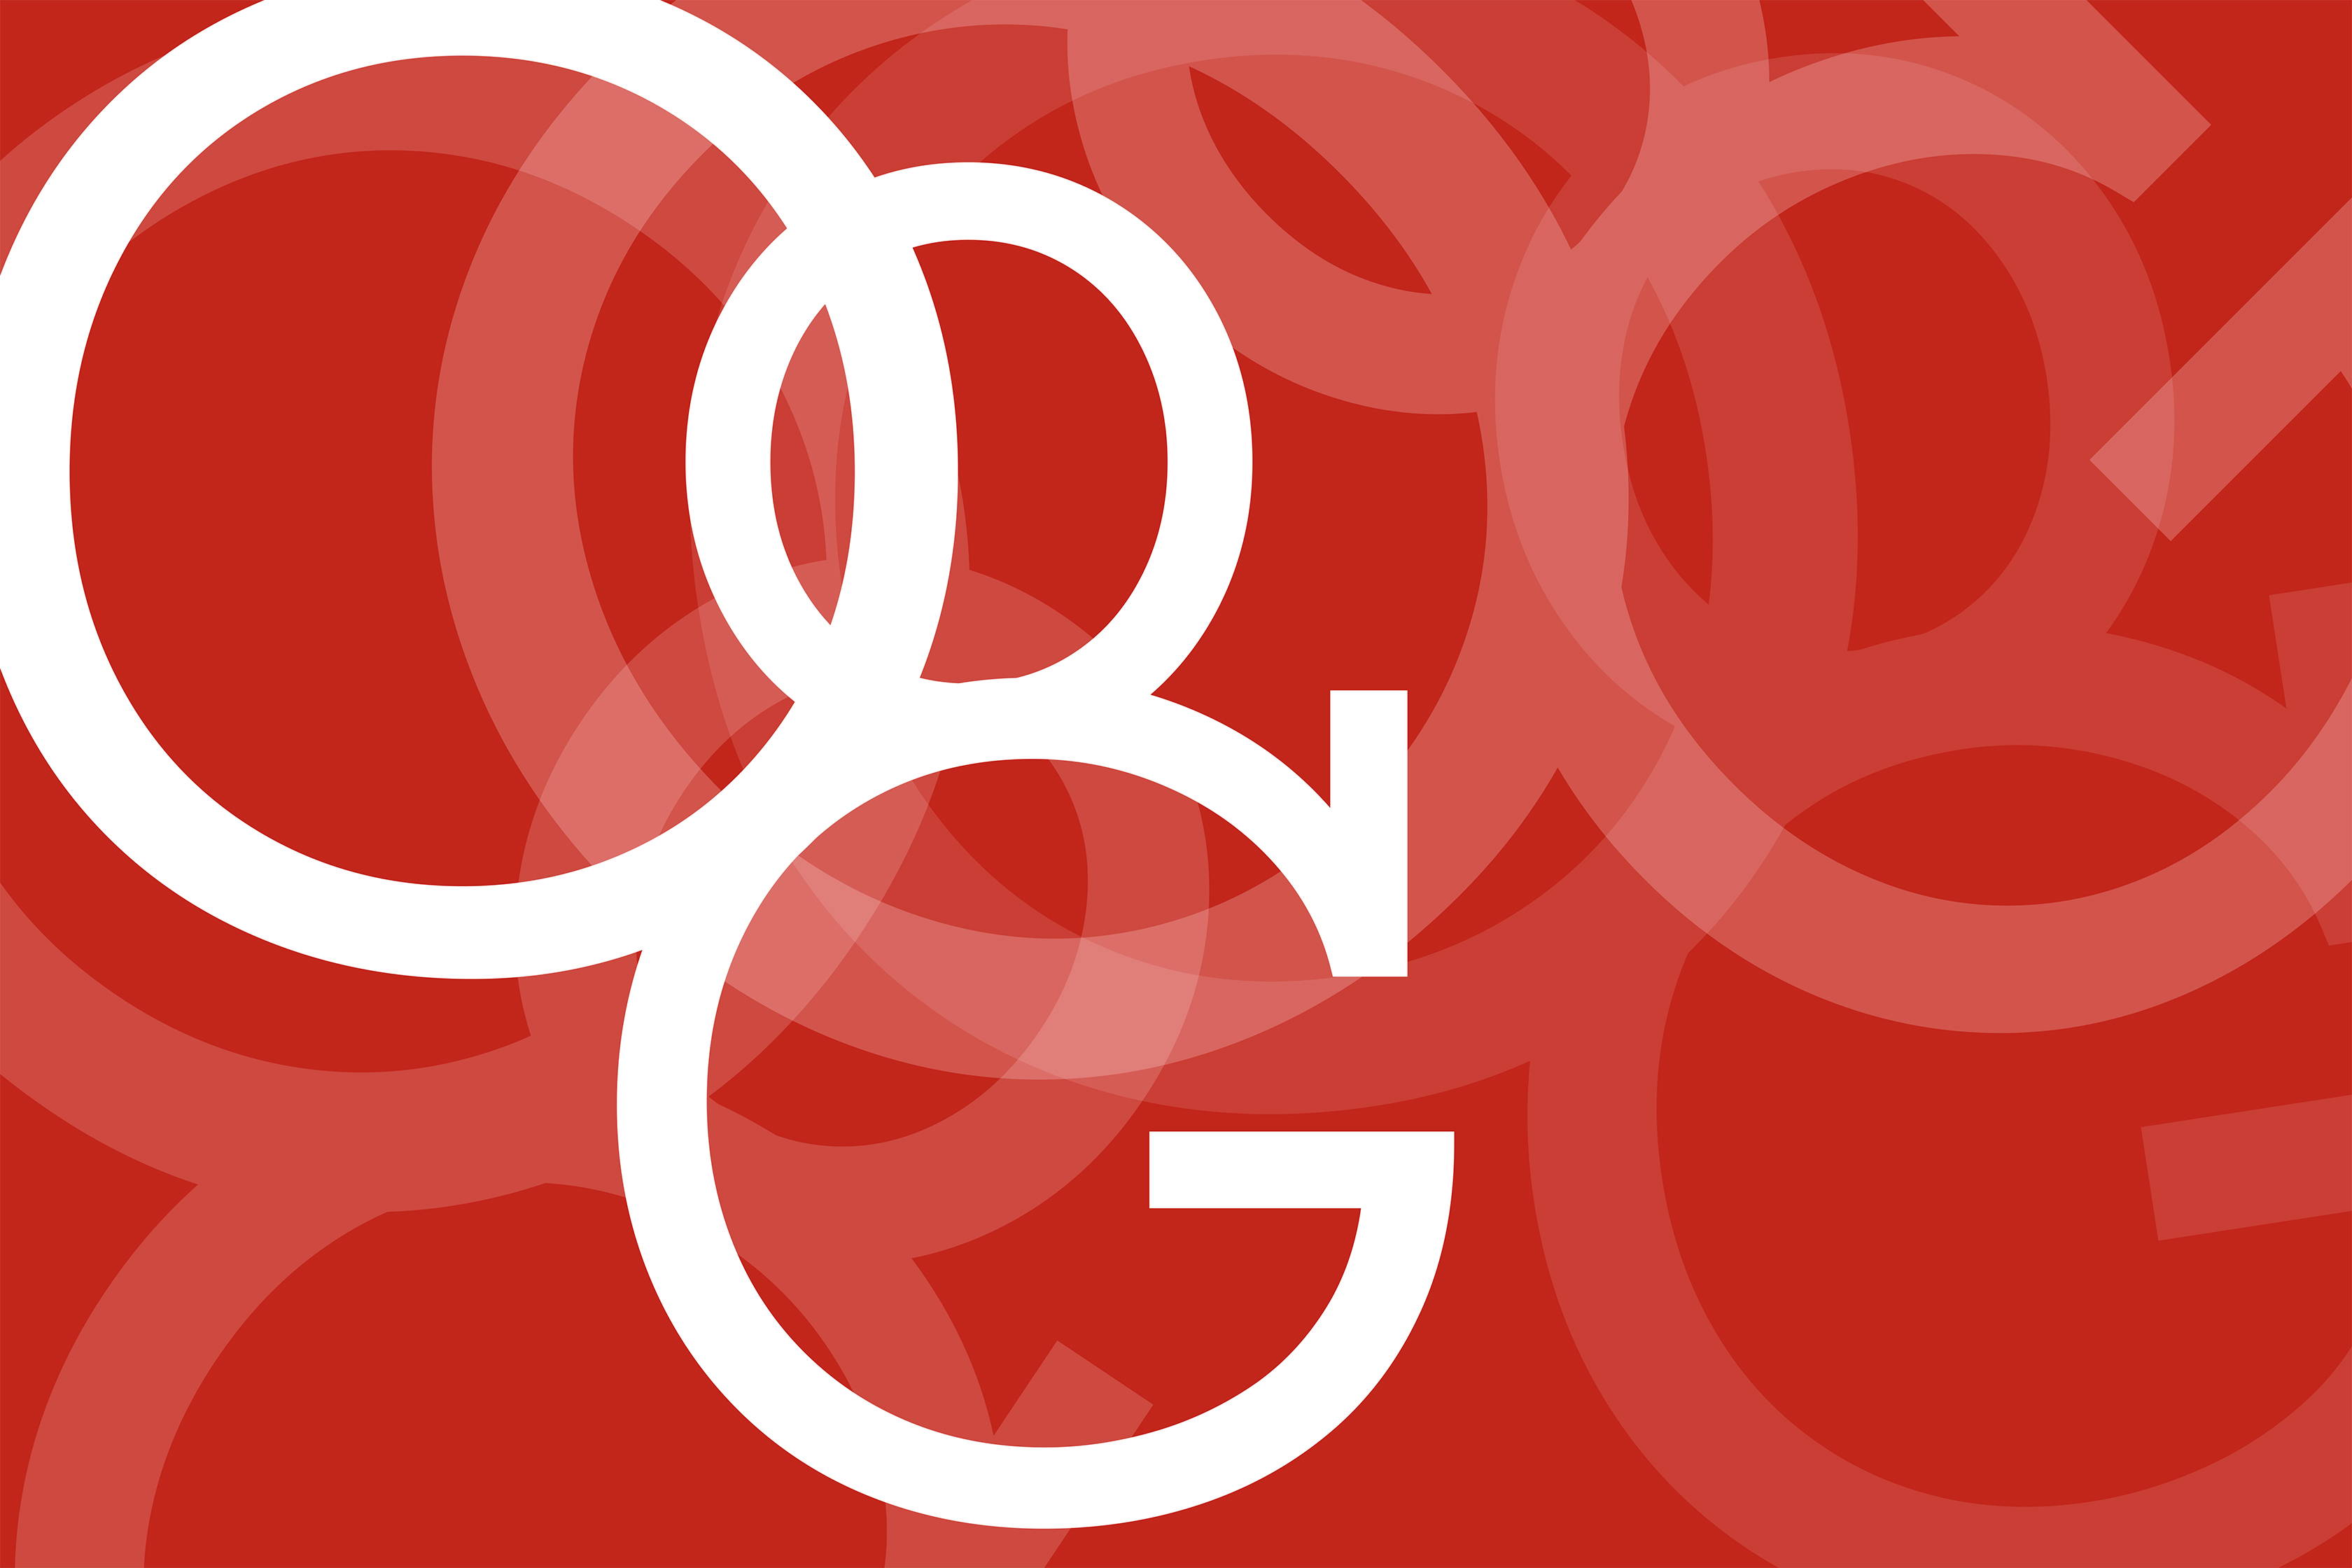 Large OoG logo multiple times and opacities overlaying red background